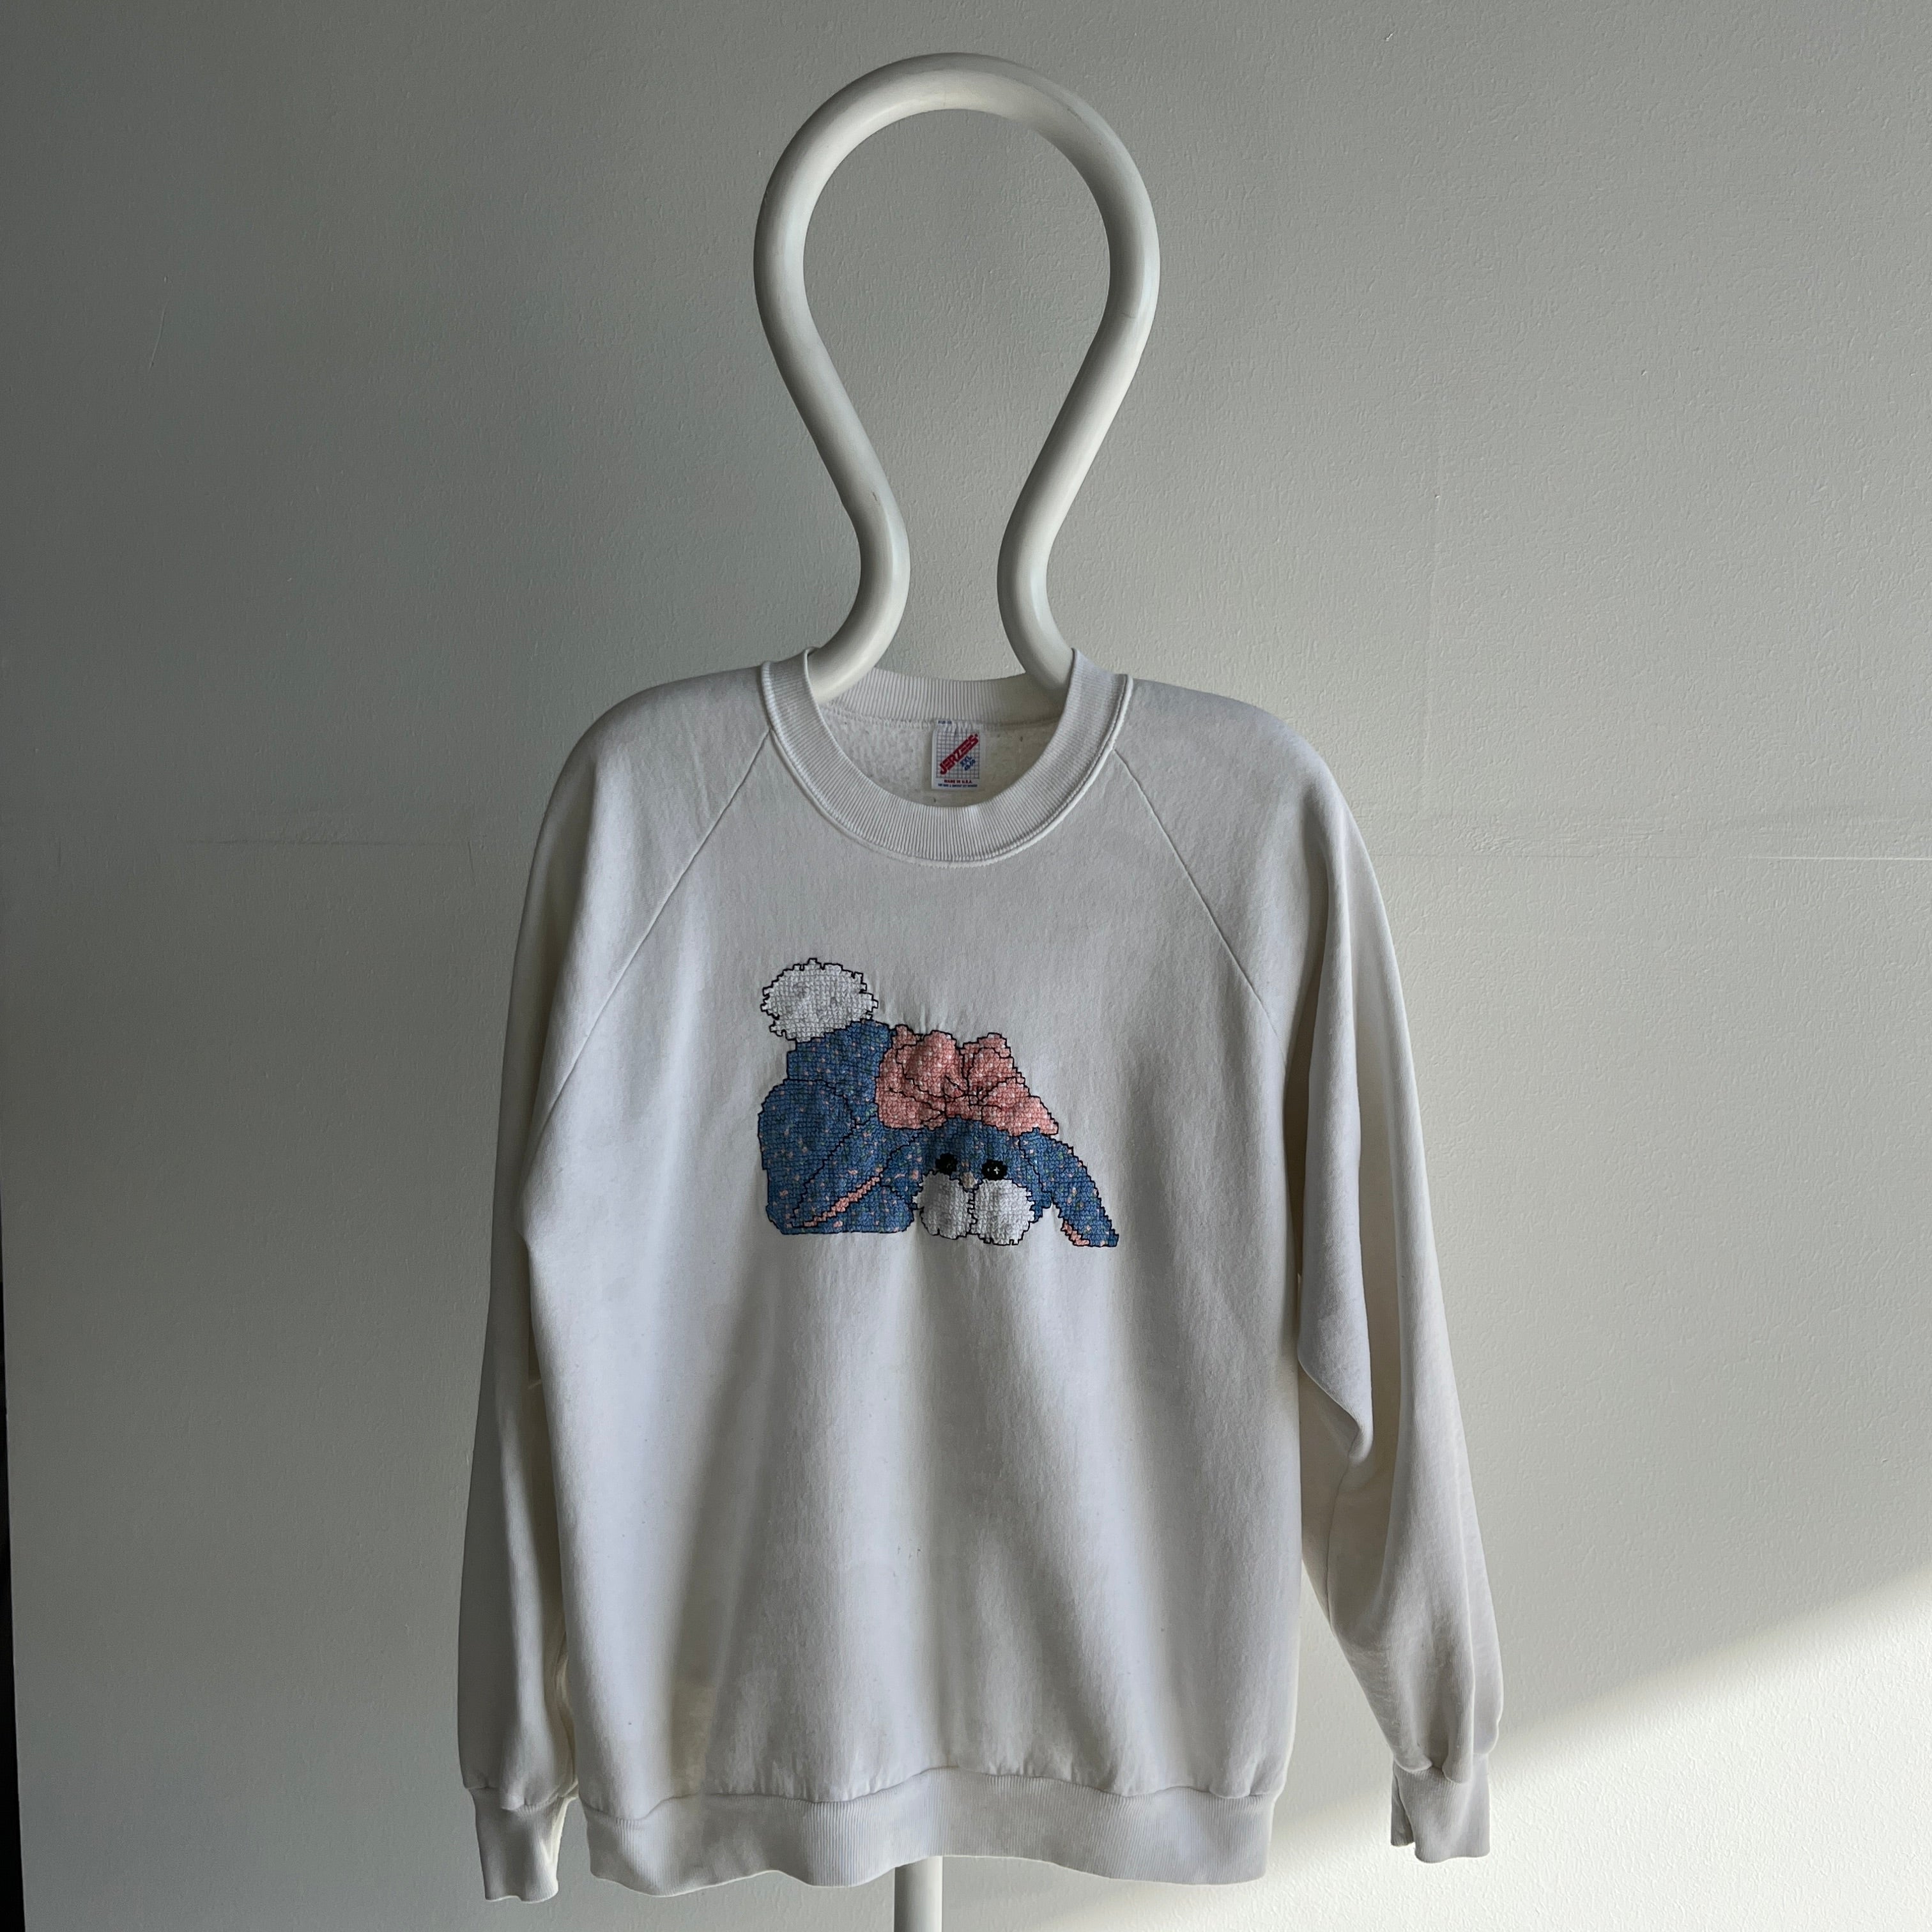 1980s Needlepoint Bunny Sweatshirt with Stains